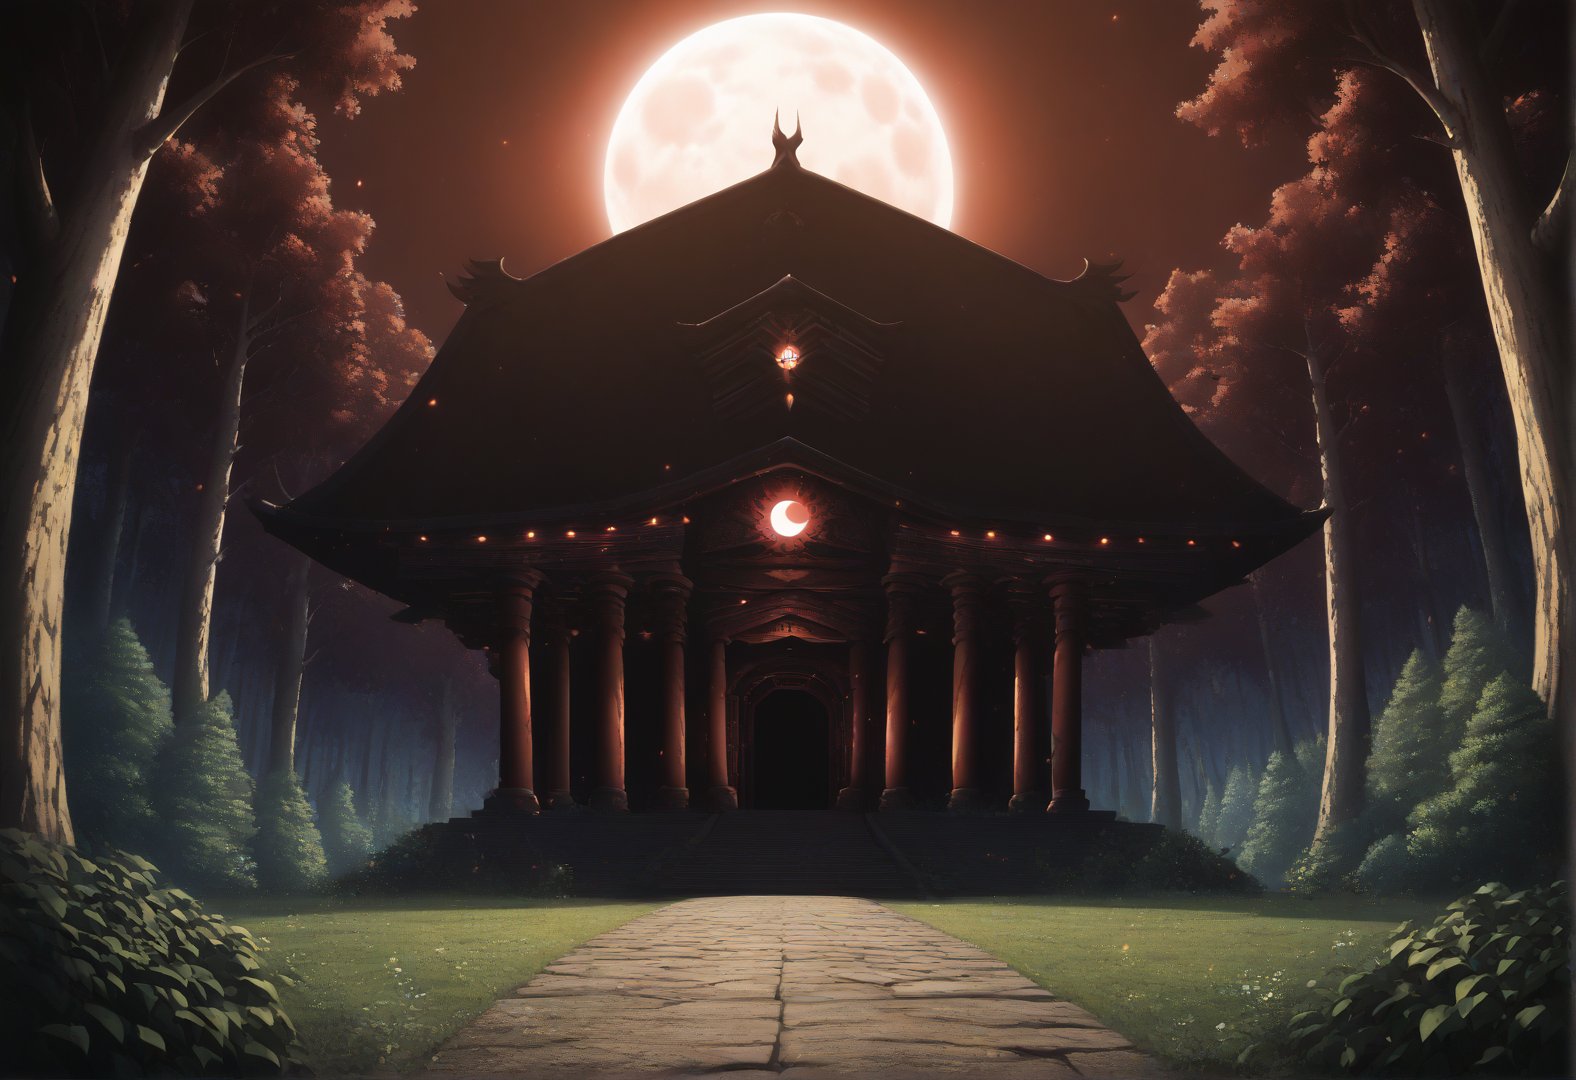 score_9, score_8_up, score_7_up, Otherworldly, Cinematic, Ominous mountain, blood red moon, forest, Japanese temple, symmetrical digital illustration, over detailed art, music album art, Creepy, no humans